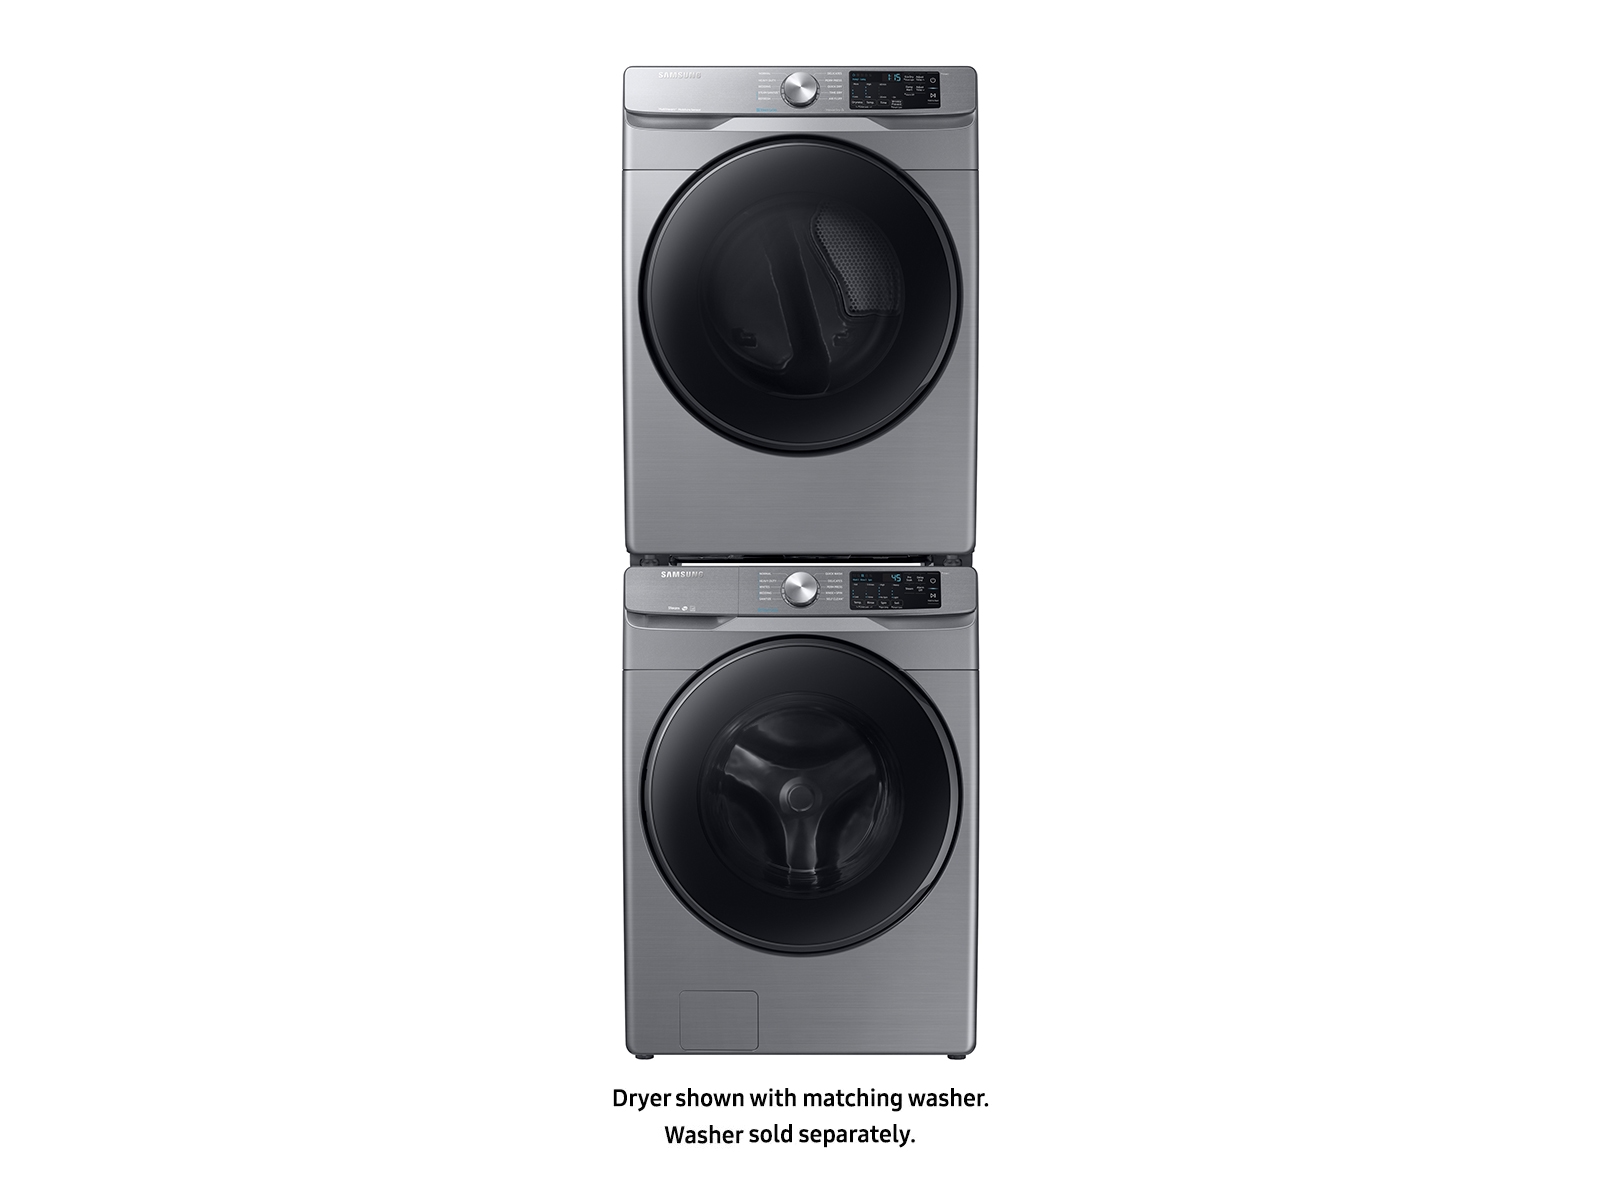 Samsung 7.5 cu. ft. Stackable Vented Electric Dryer with Sensor